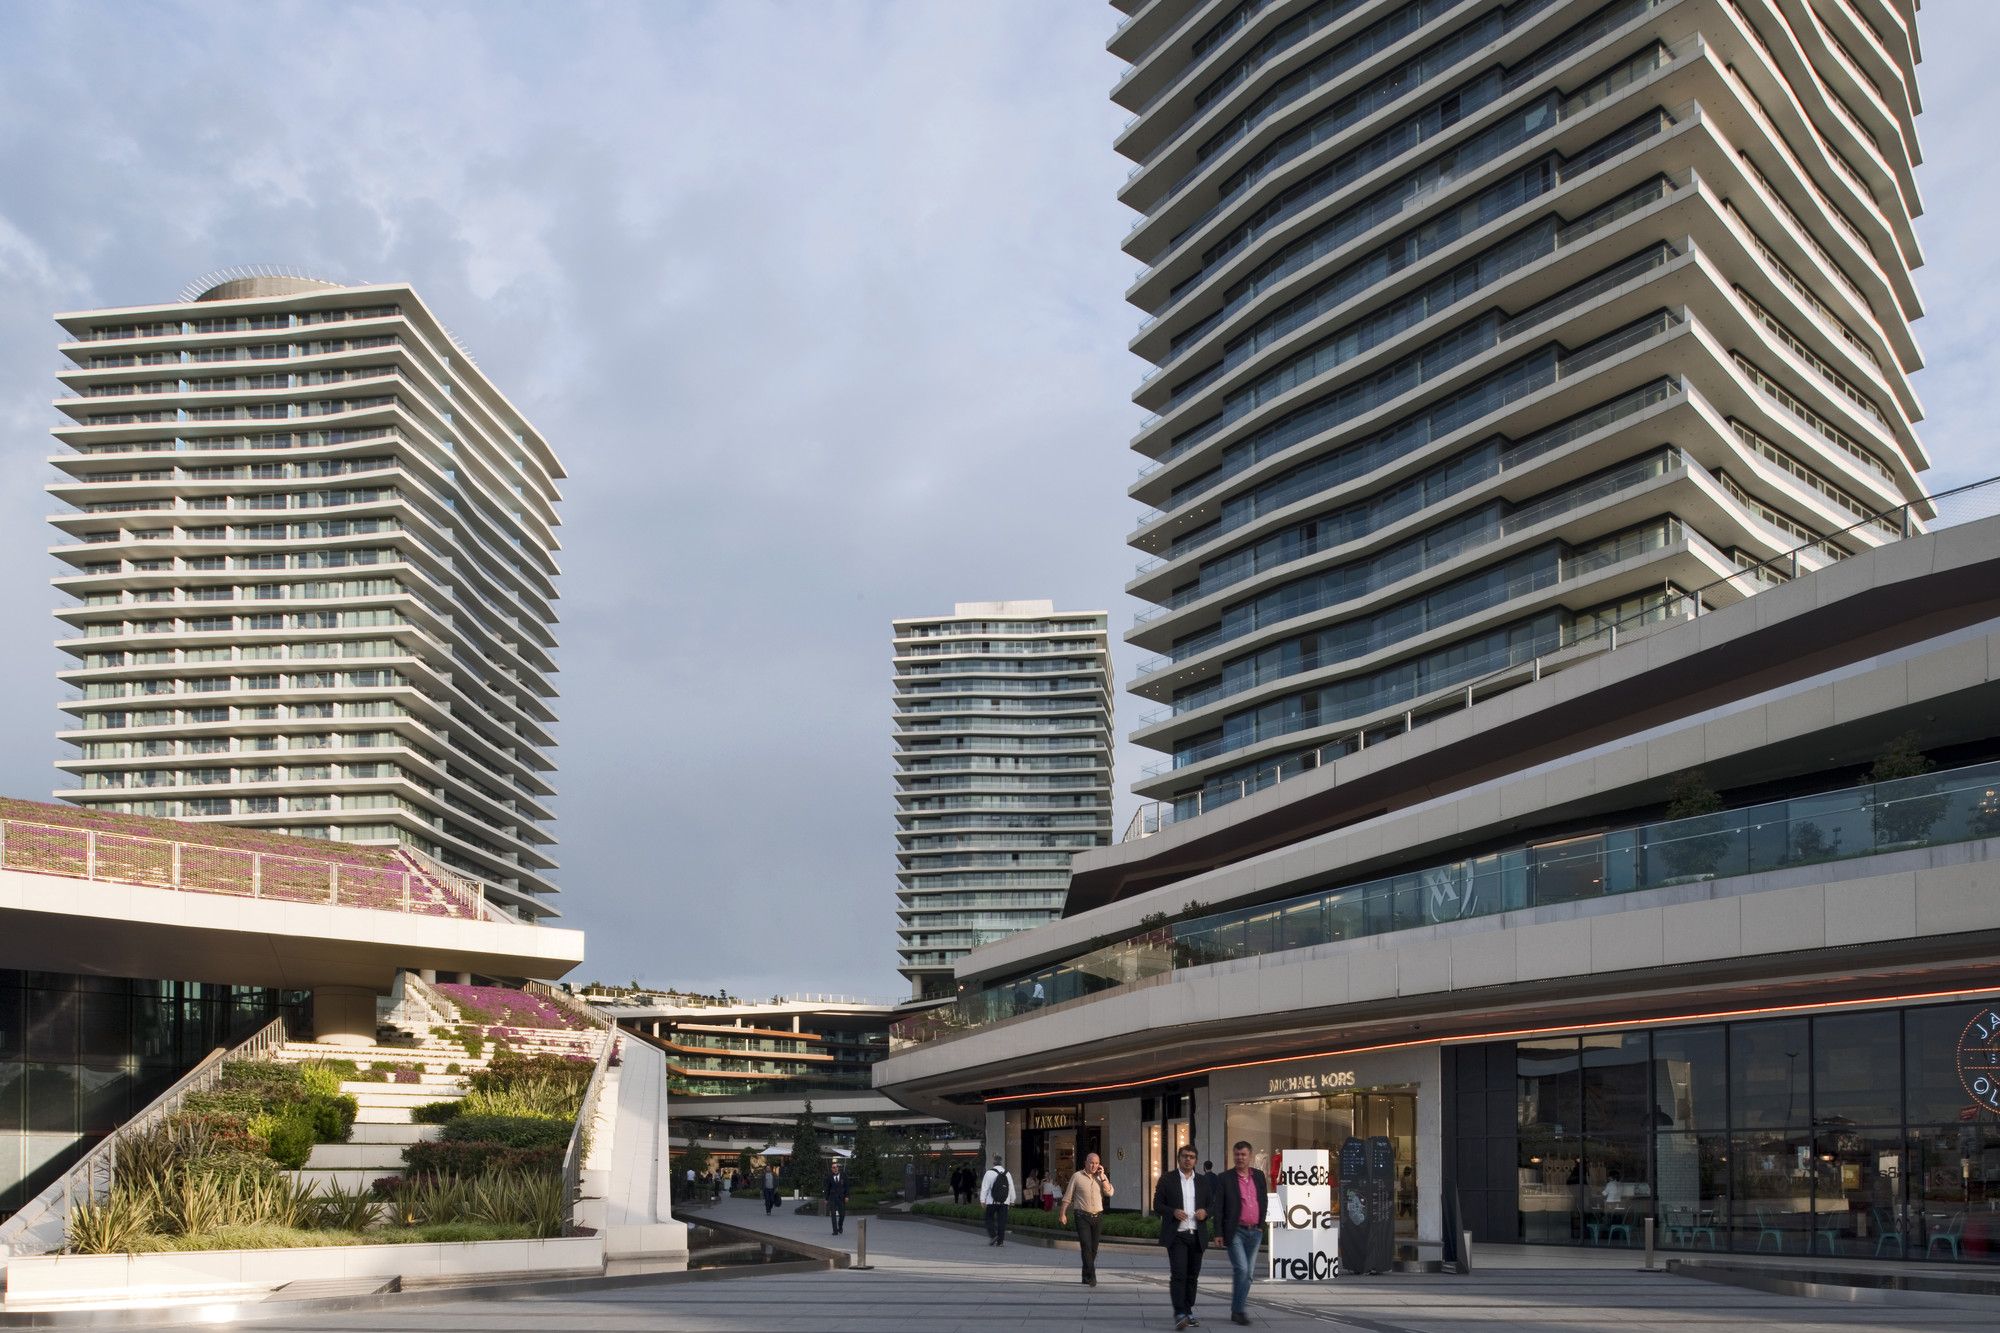 Zorlu Center (Istanbul) - All You Need to Know BEFORE You Go (with